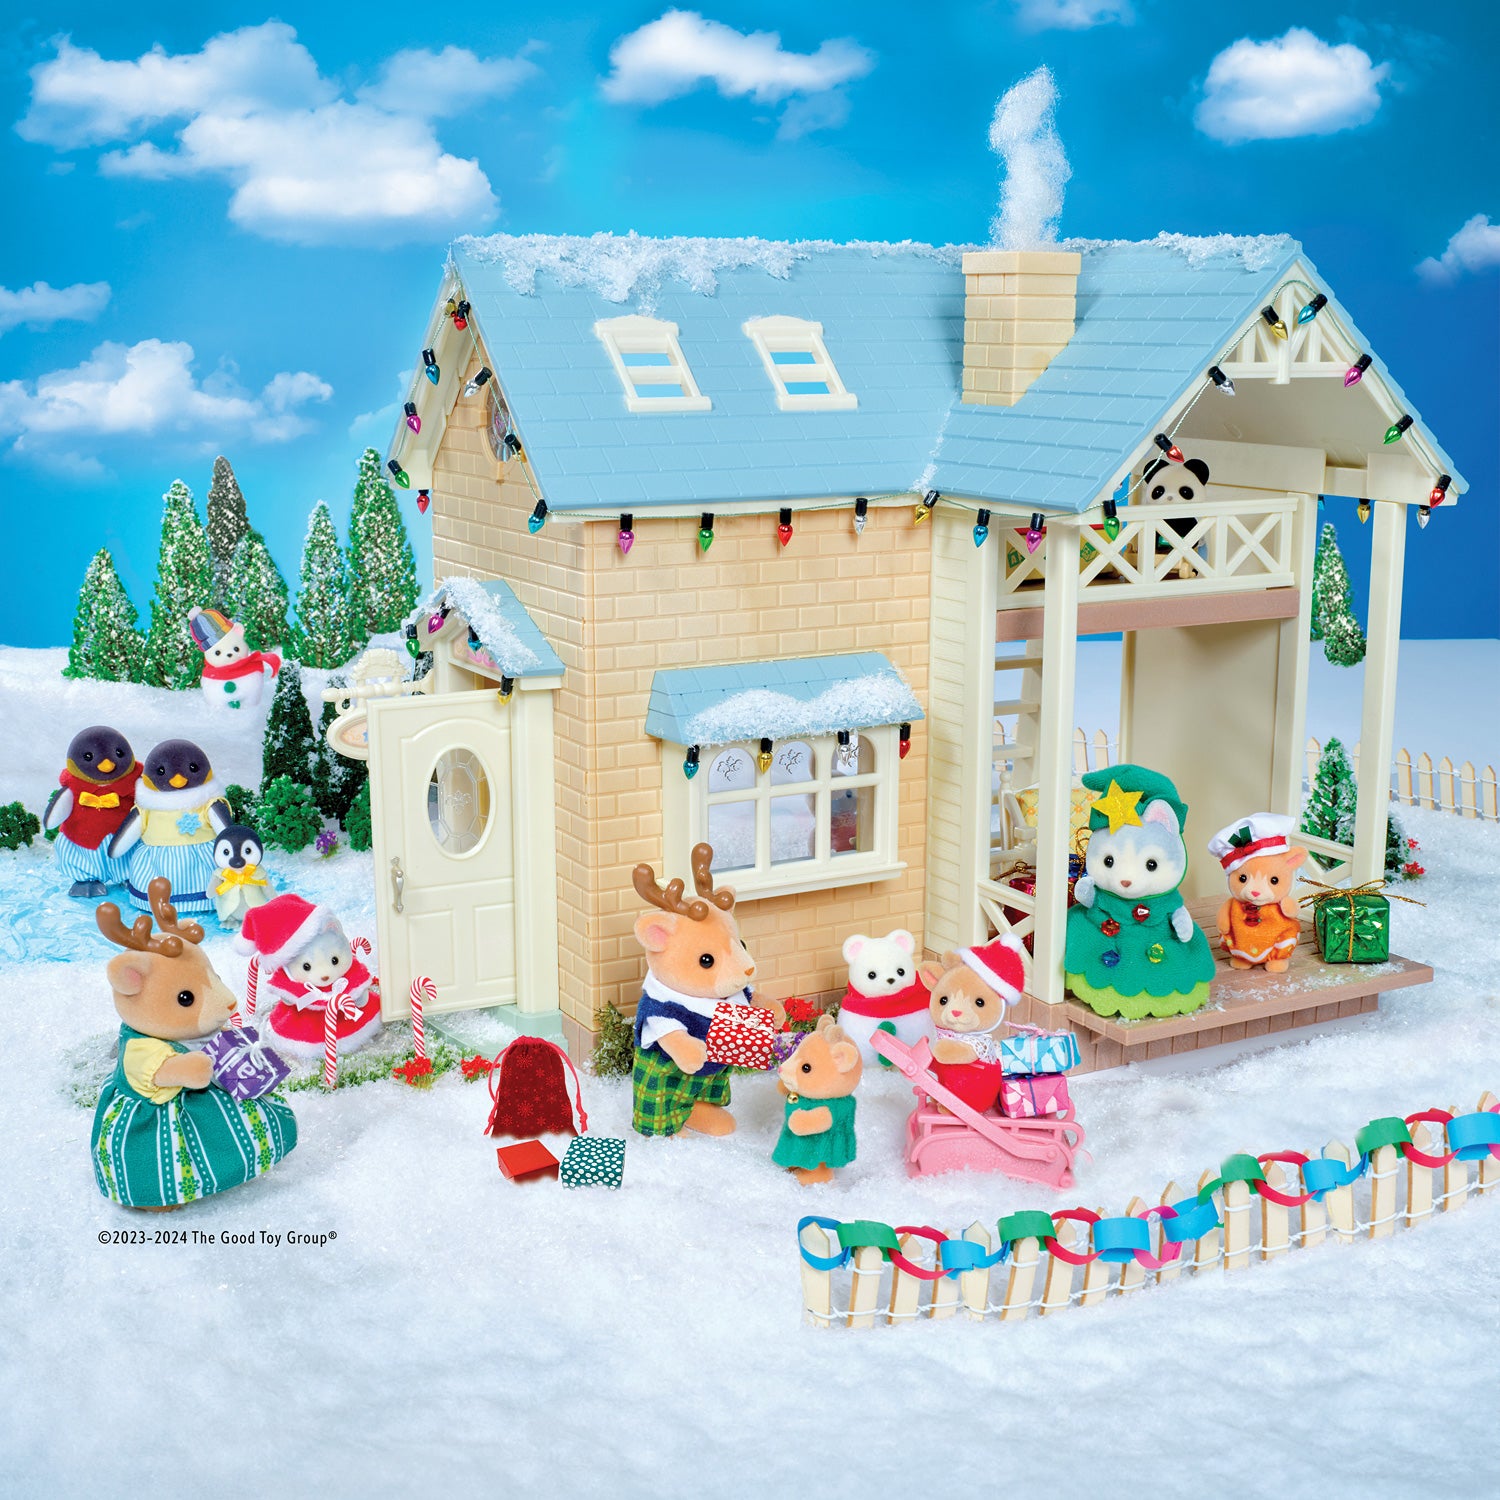 Calico critters, Toys